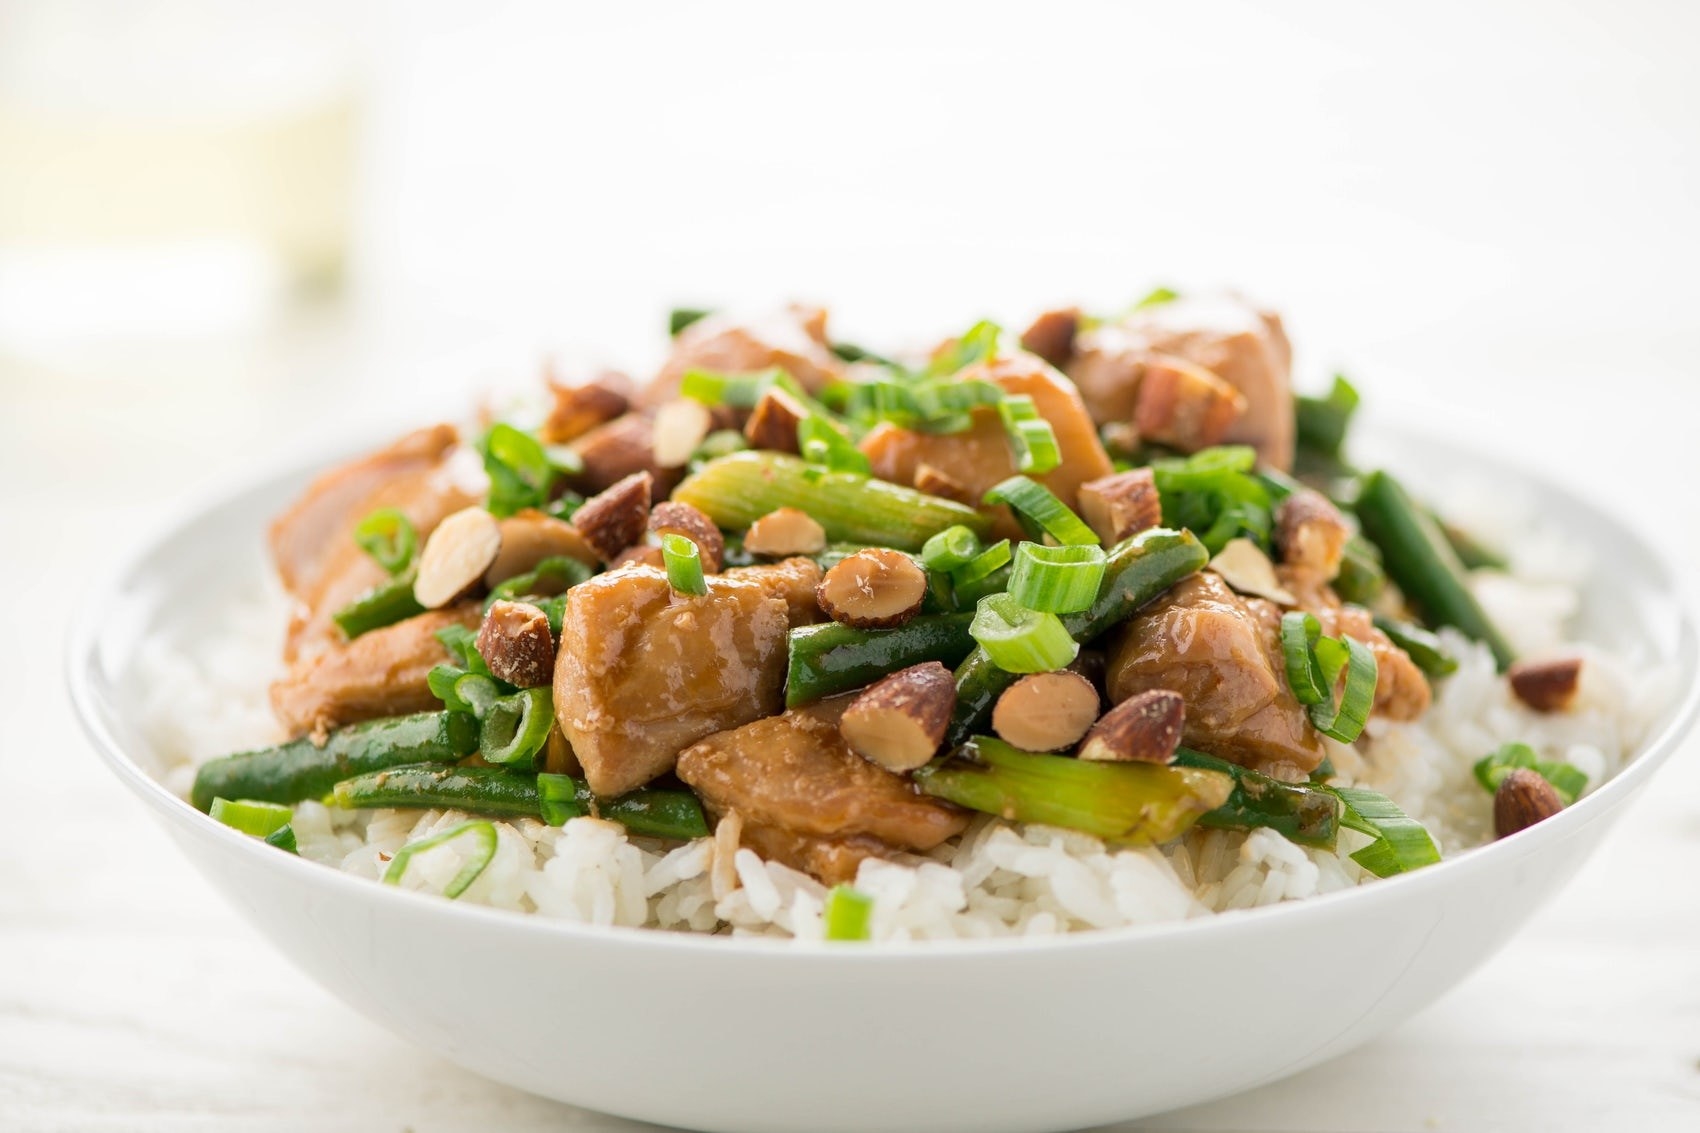 The Teriyaki Chicken Thighs with Smoked Almonds recipe from Home Chef&#x27;s January menu